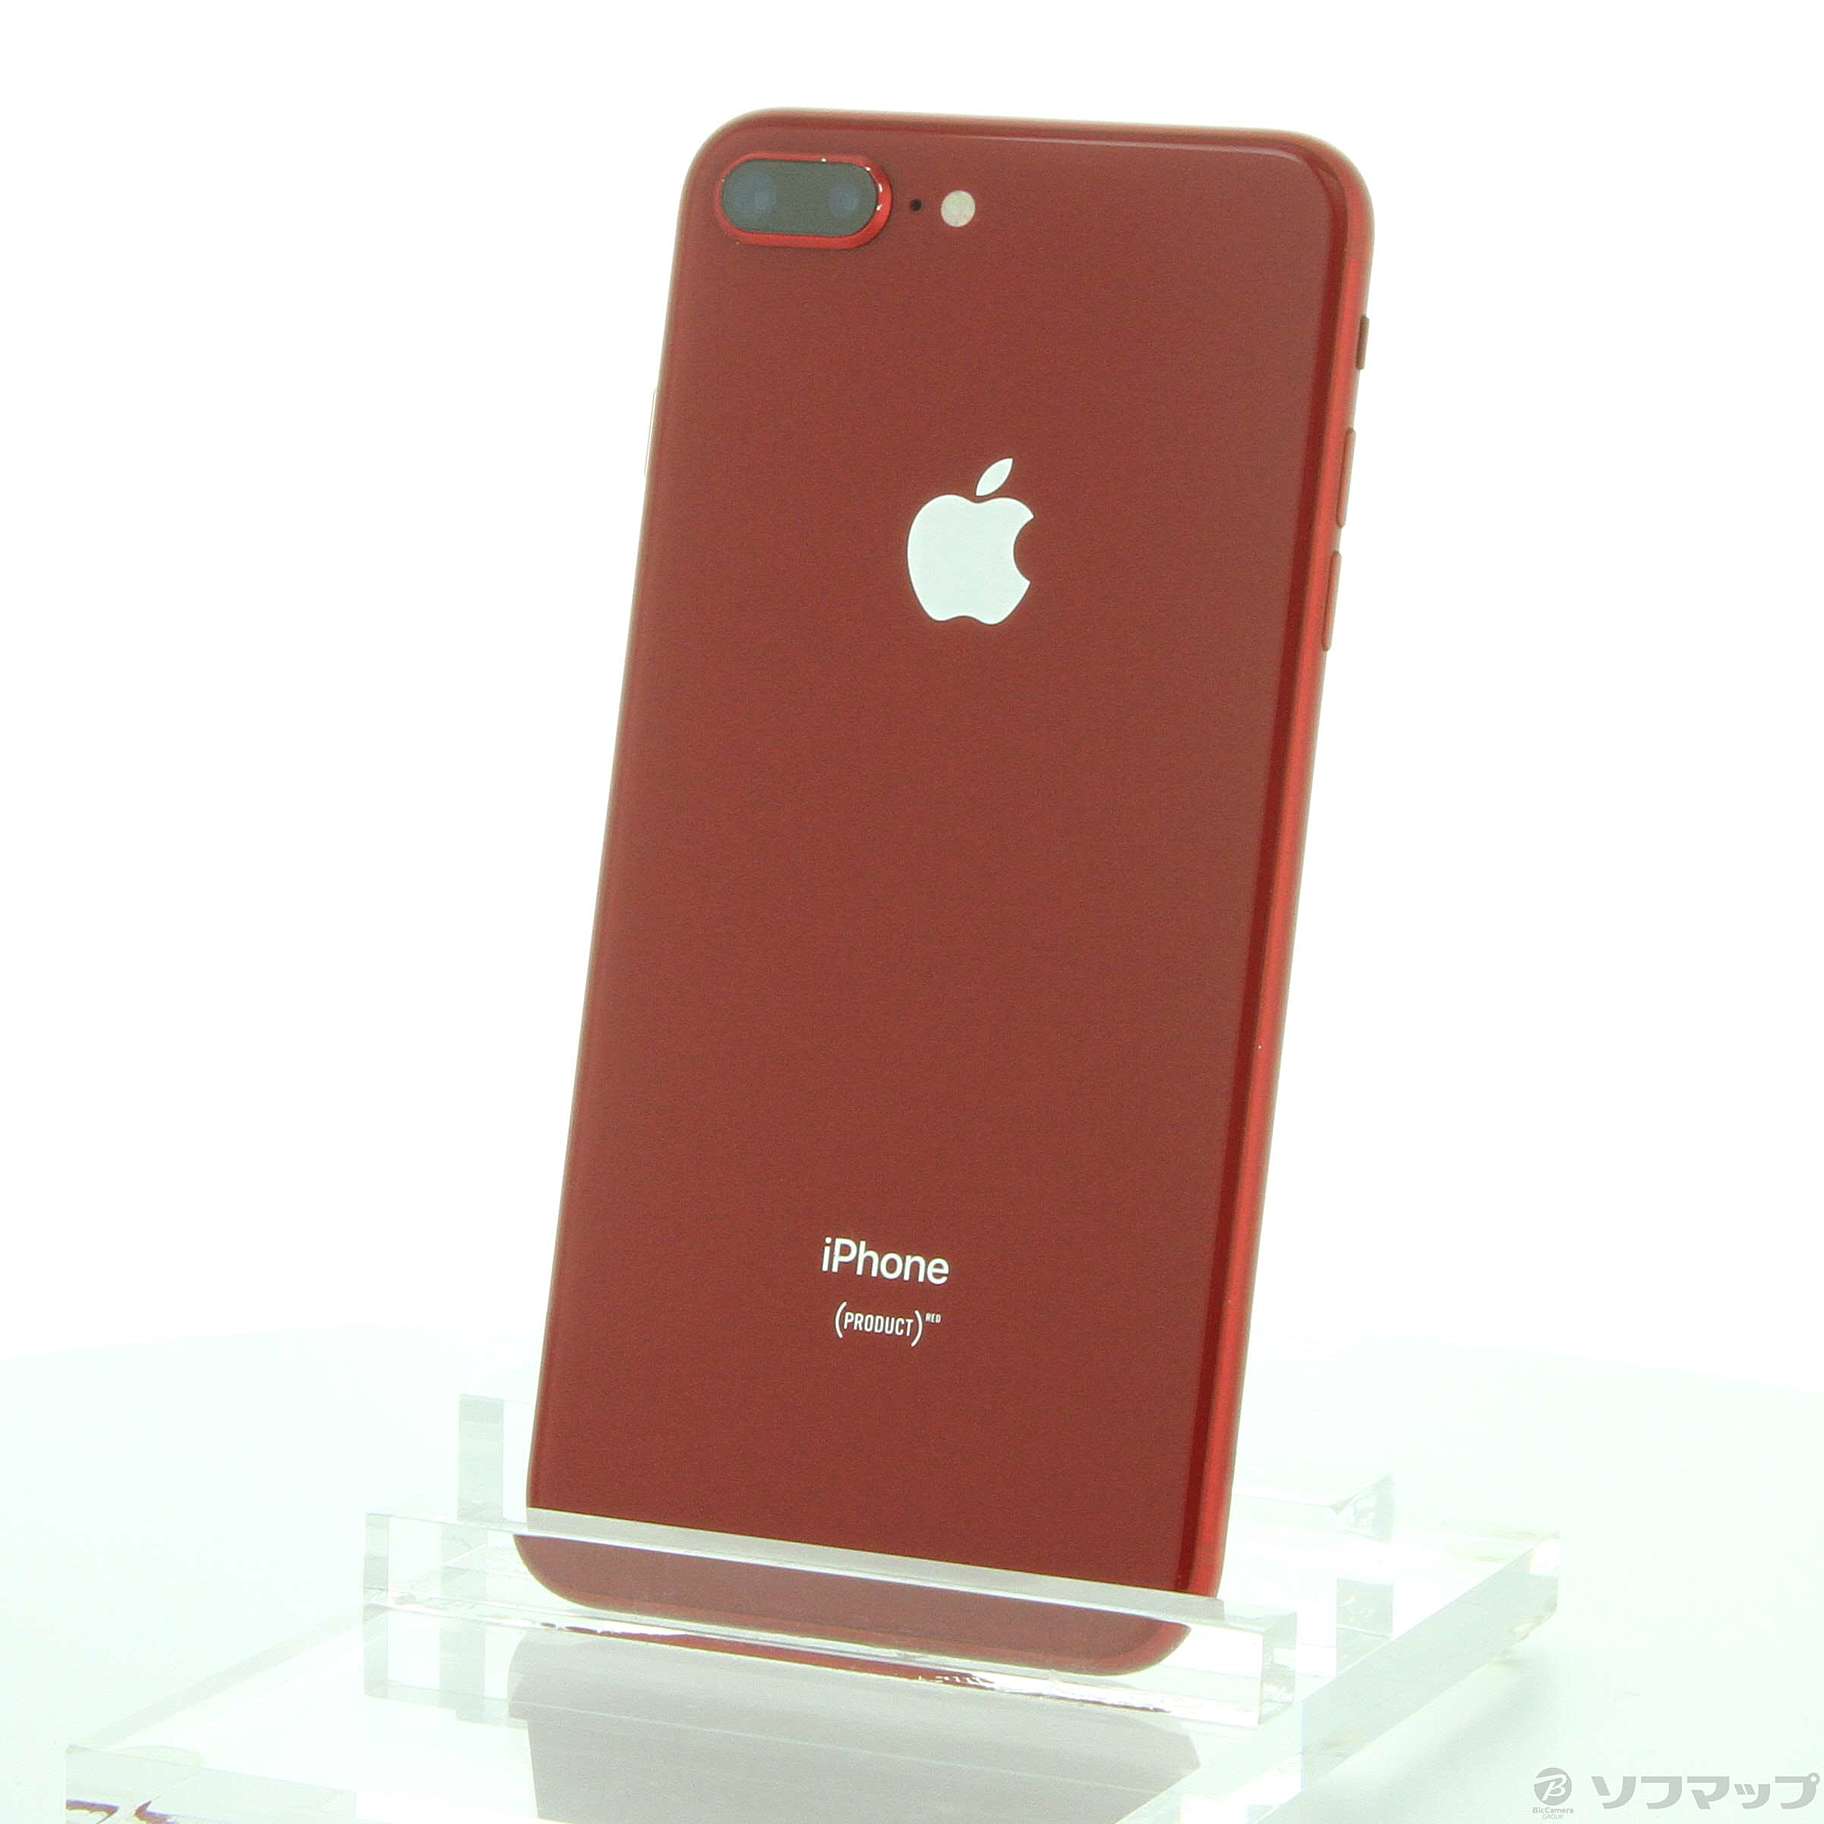 iPhone13piPhone8 Plus 64GB PRODUCT(RED) SIMフリー